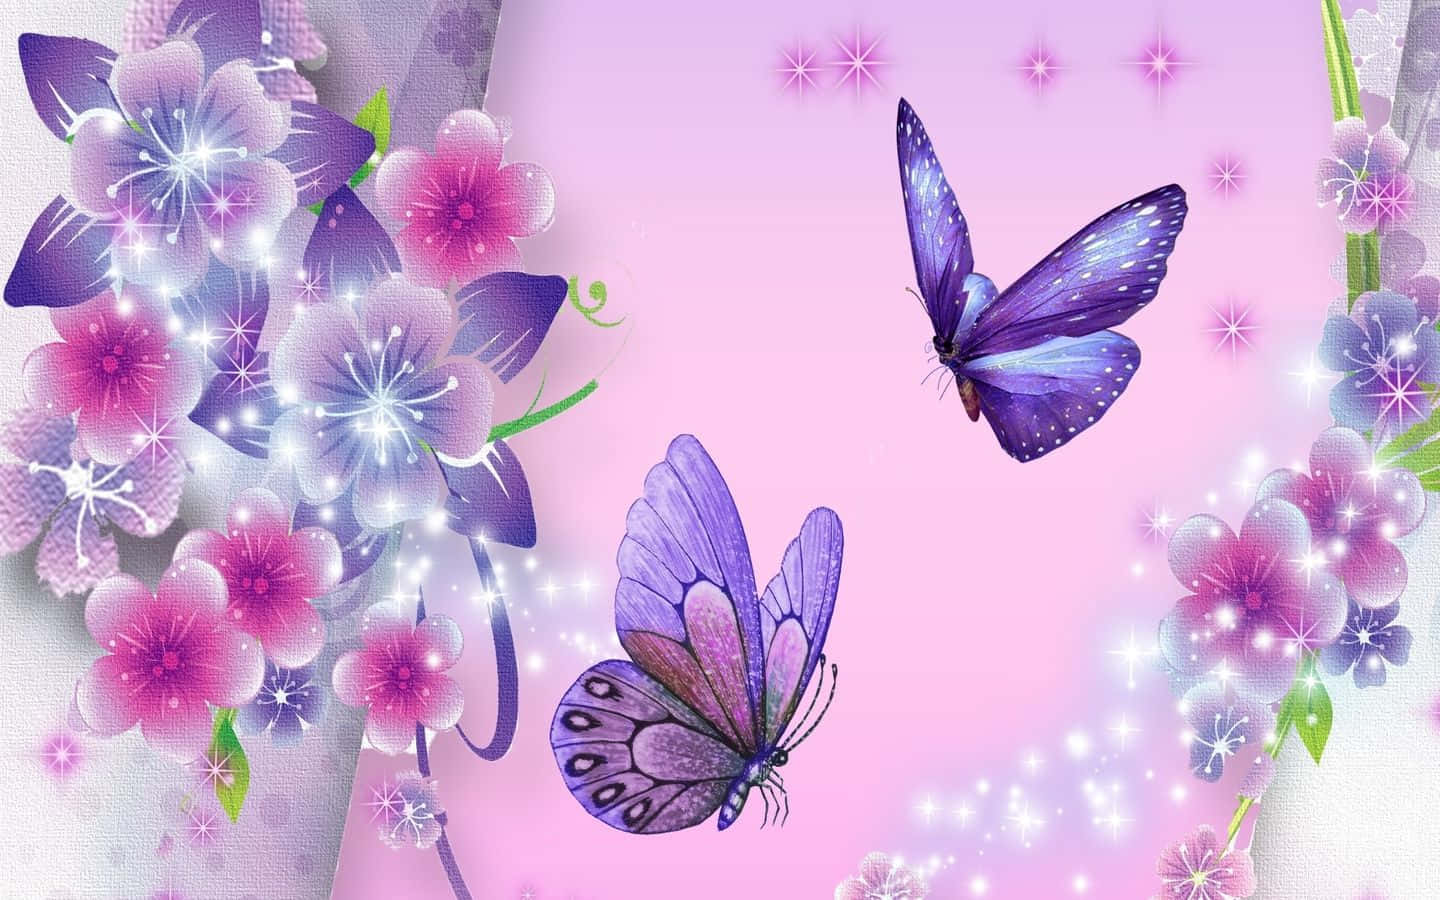 two butterflies flying in the air on a pink background